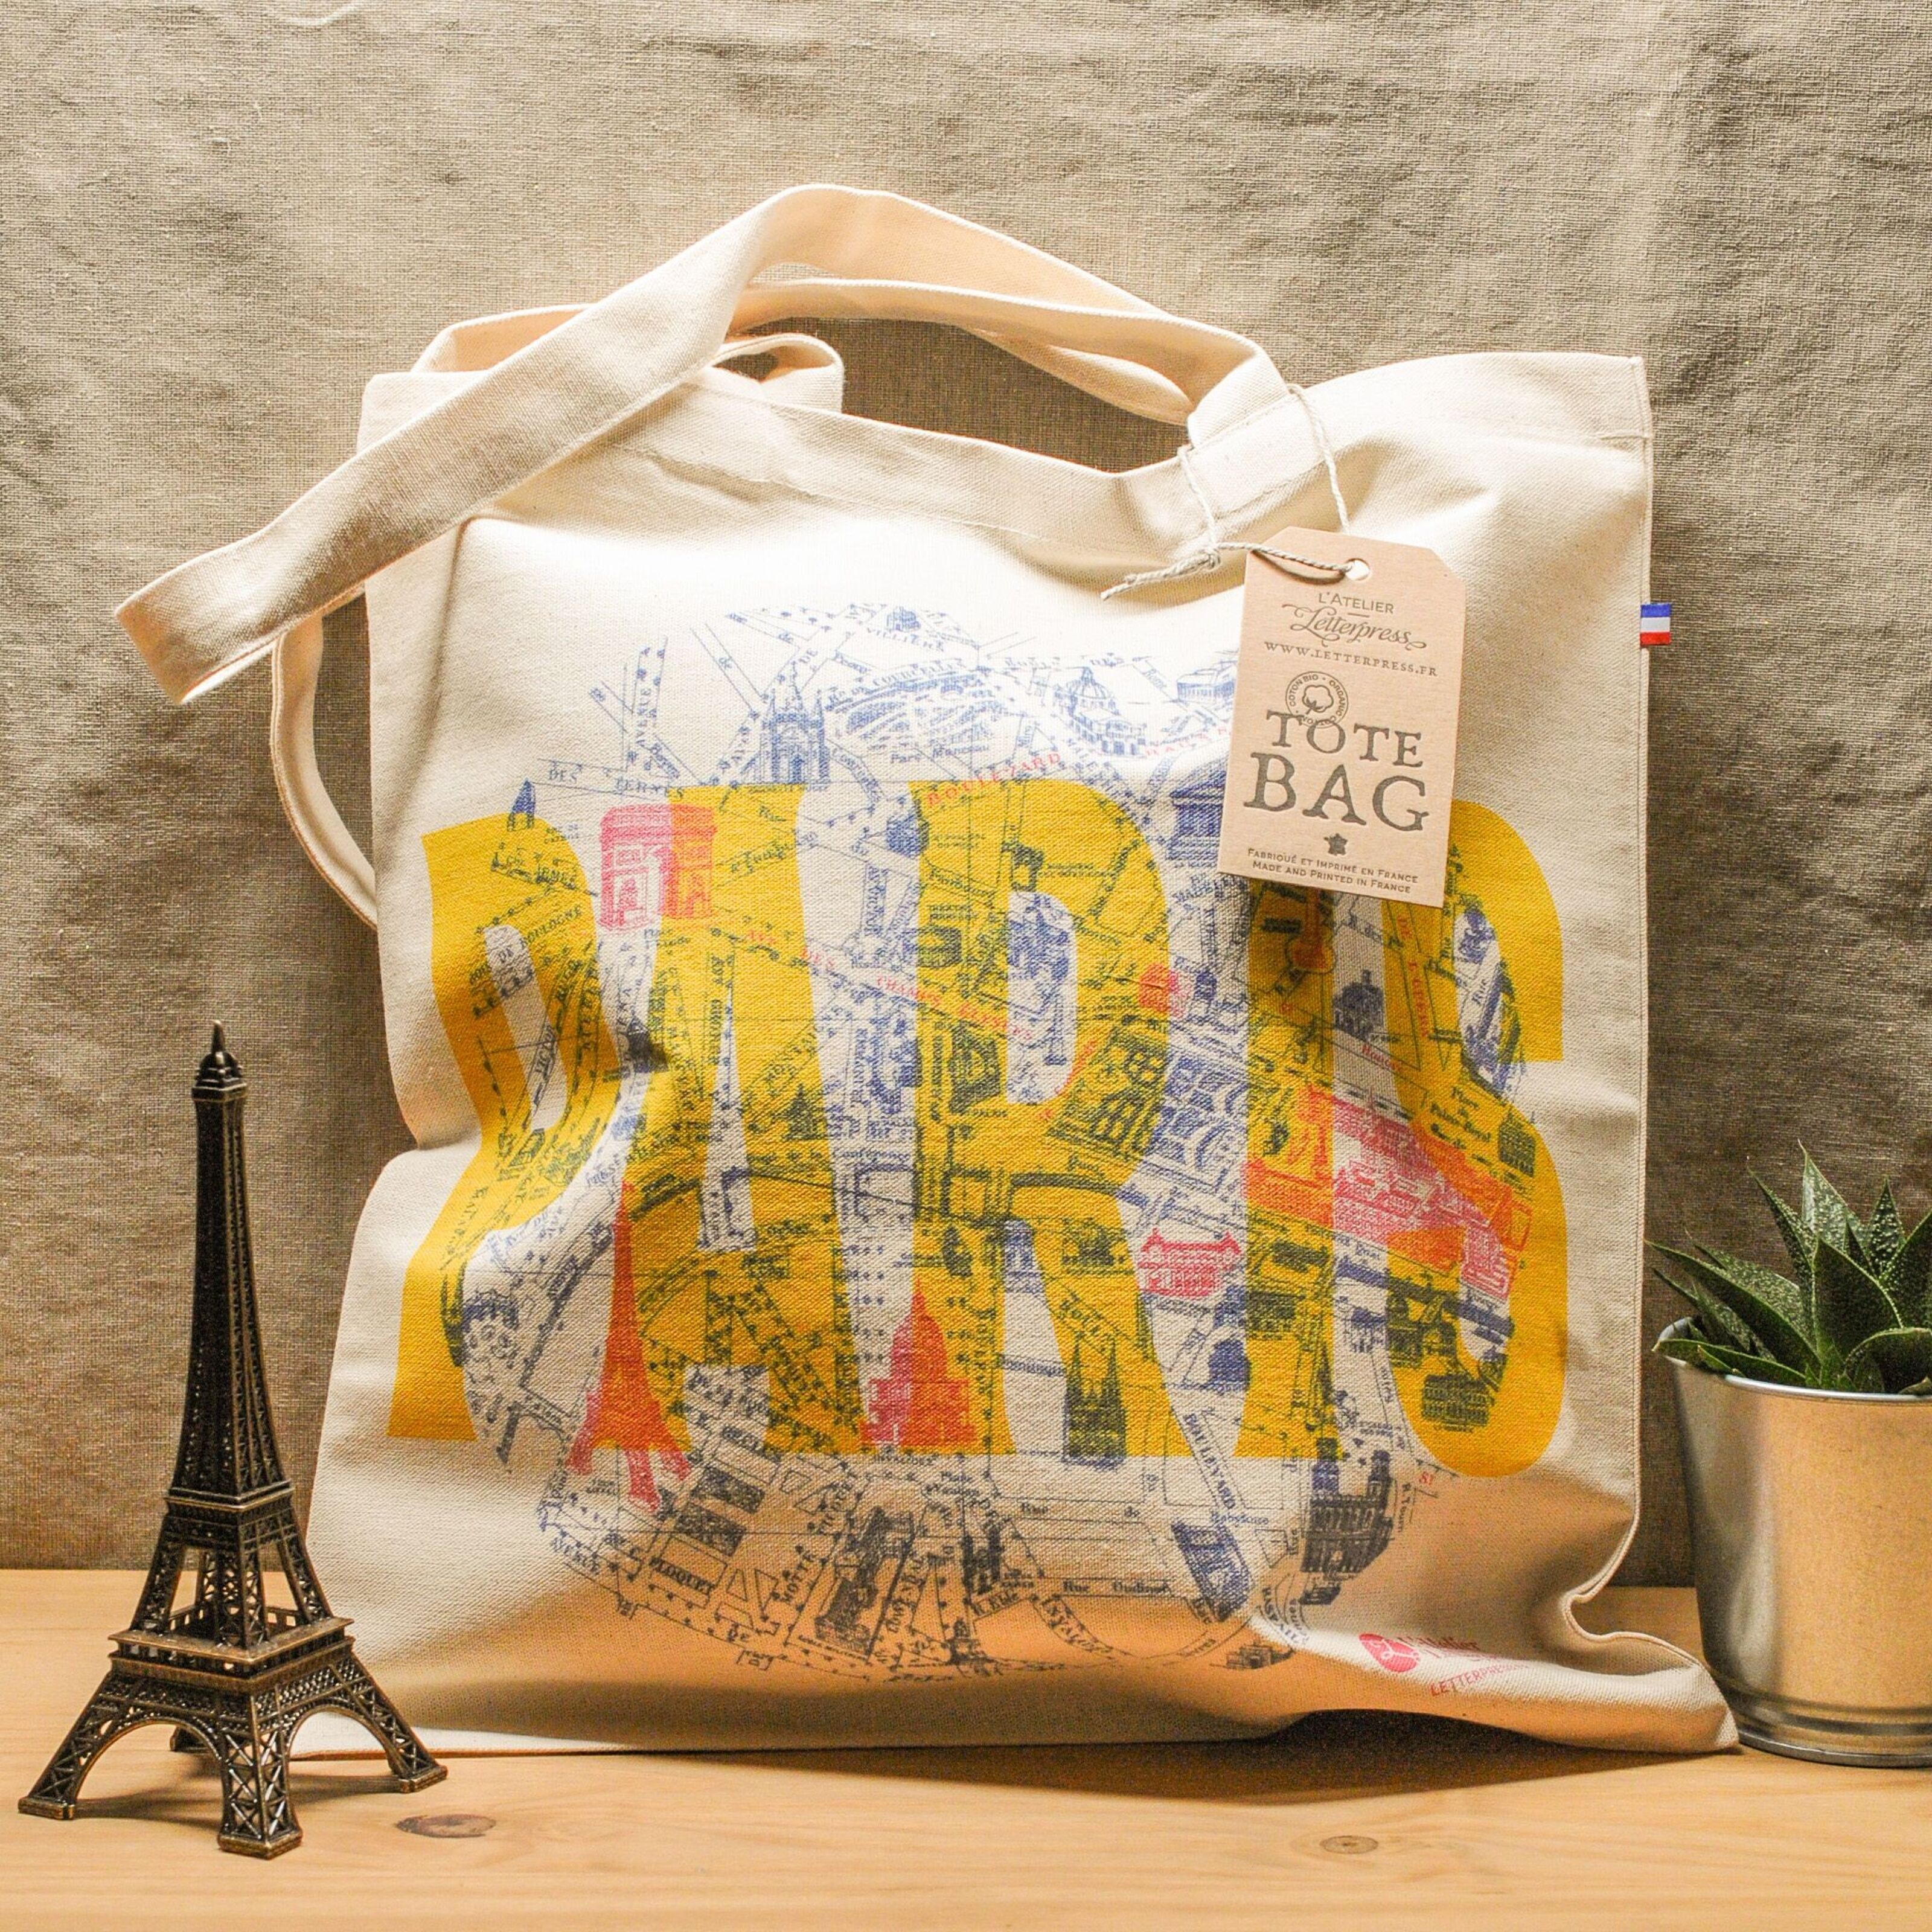 bags made in france